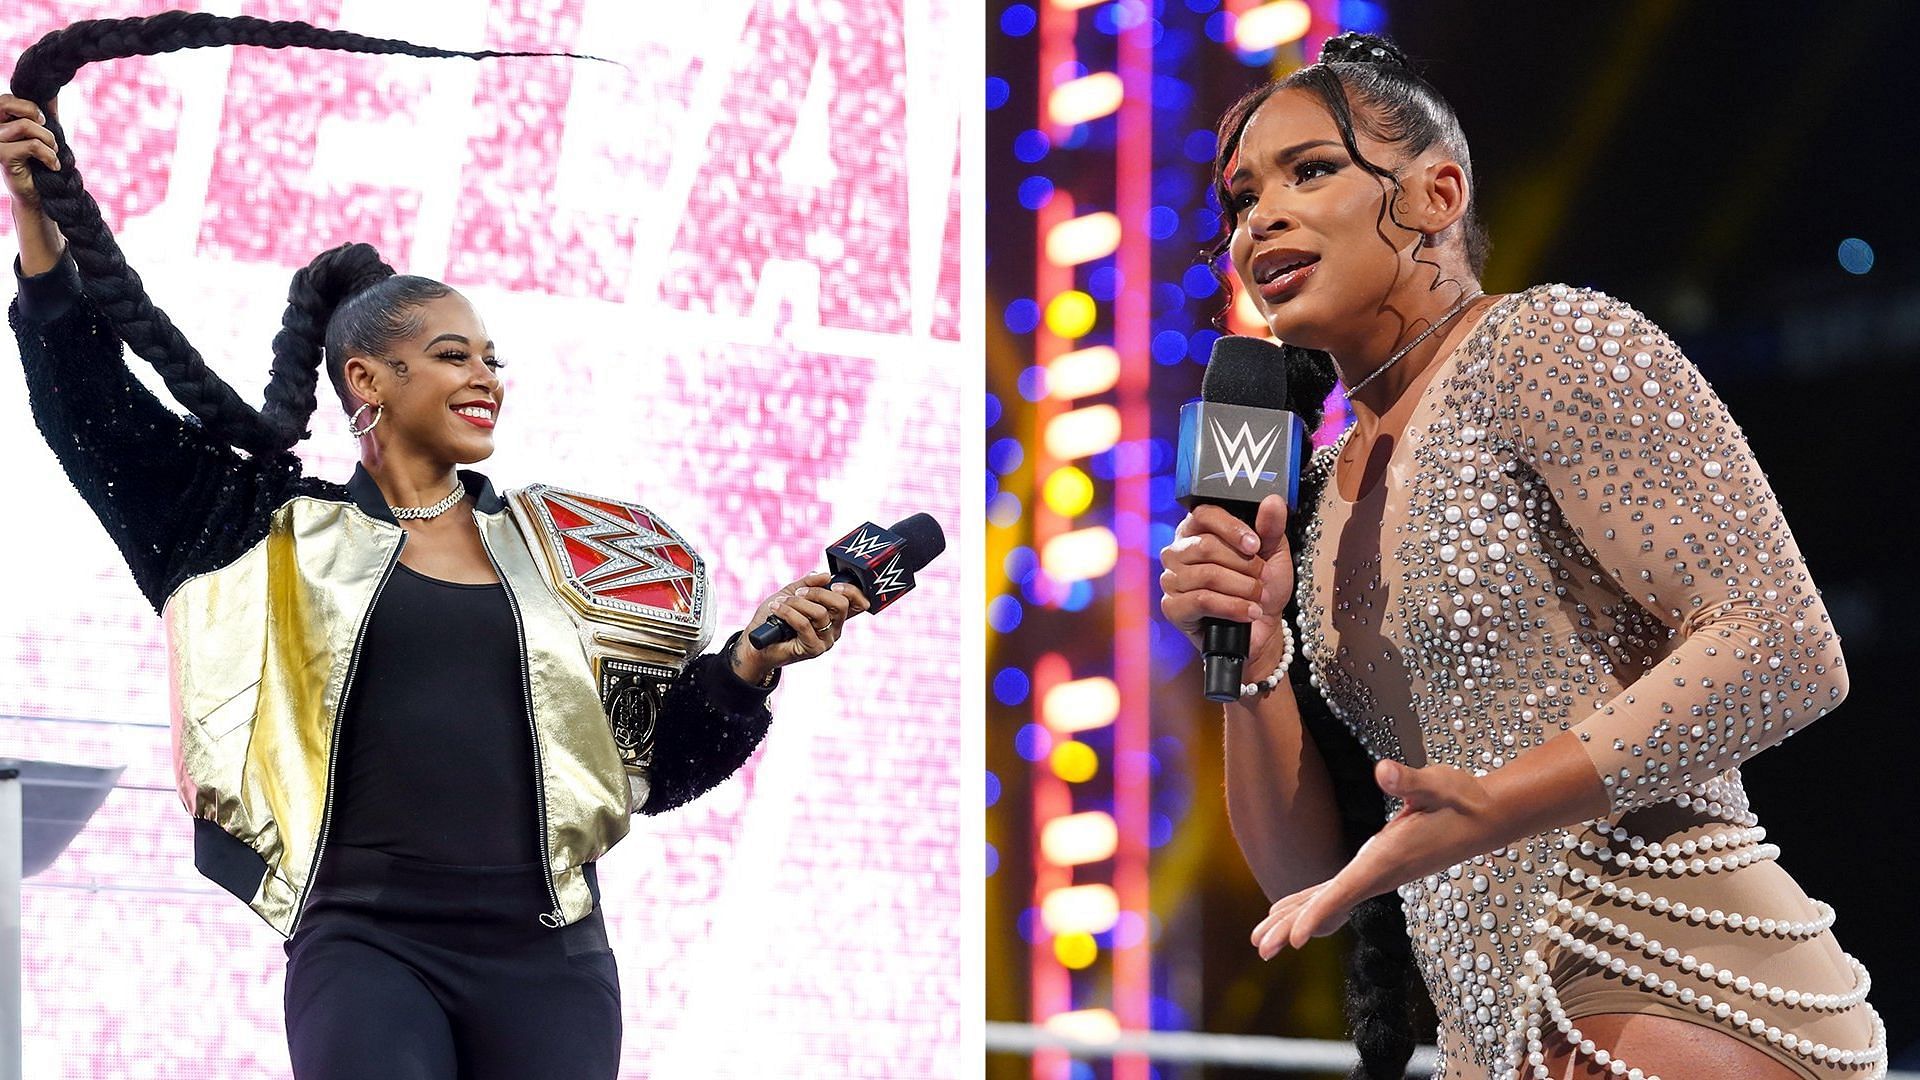 Bianca Belair is taking time off from WWE programming